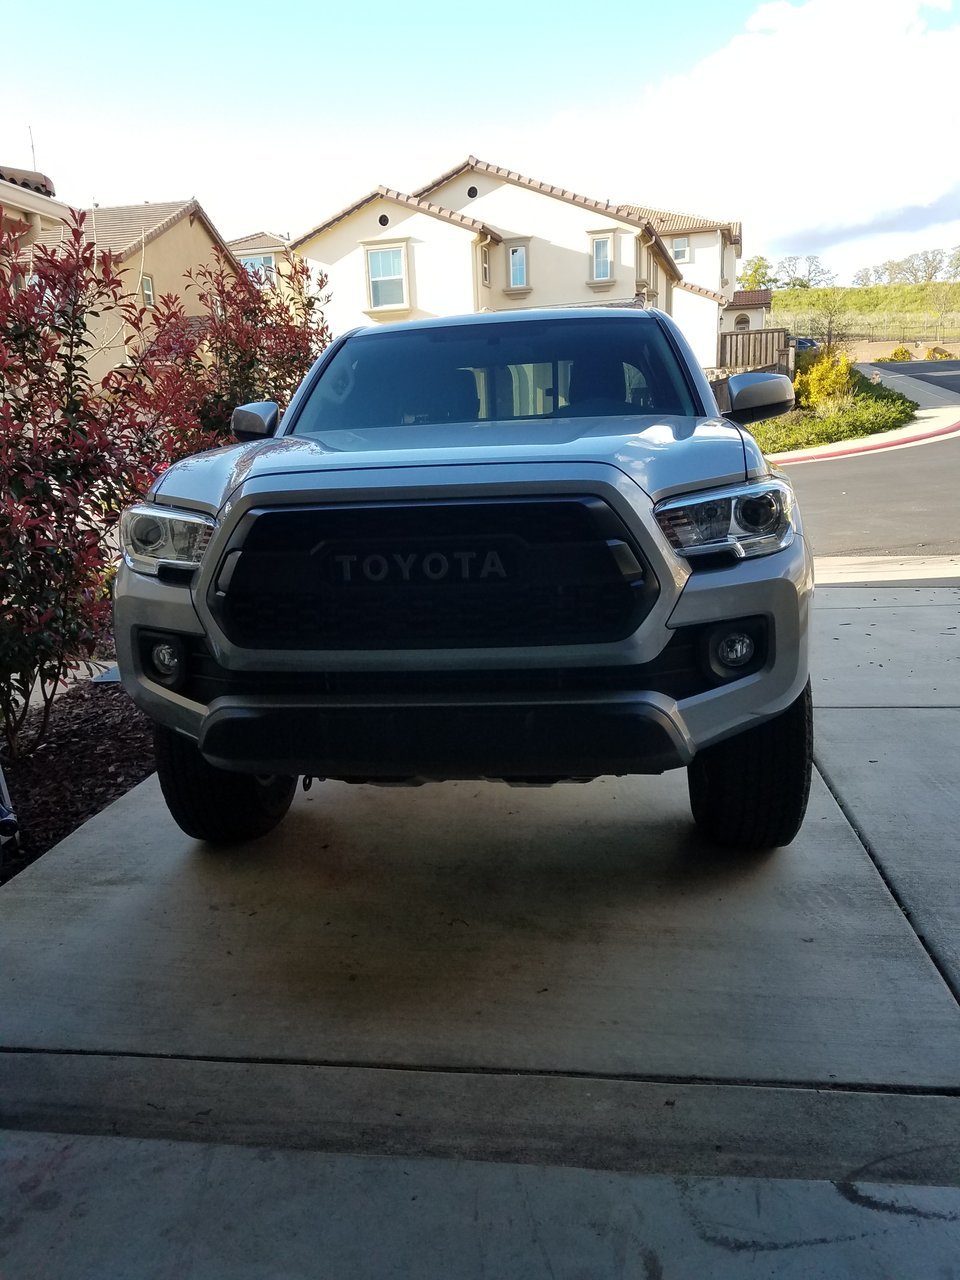 2016-2019 Toyota Tacoma Fog Light Mod! (Step by Step Picture Heavy